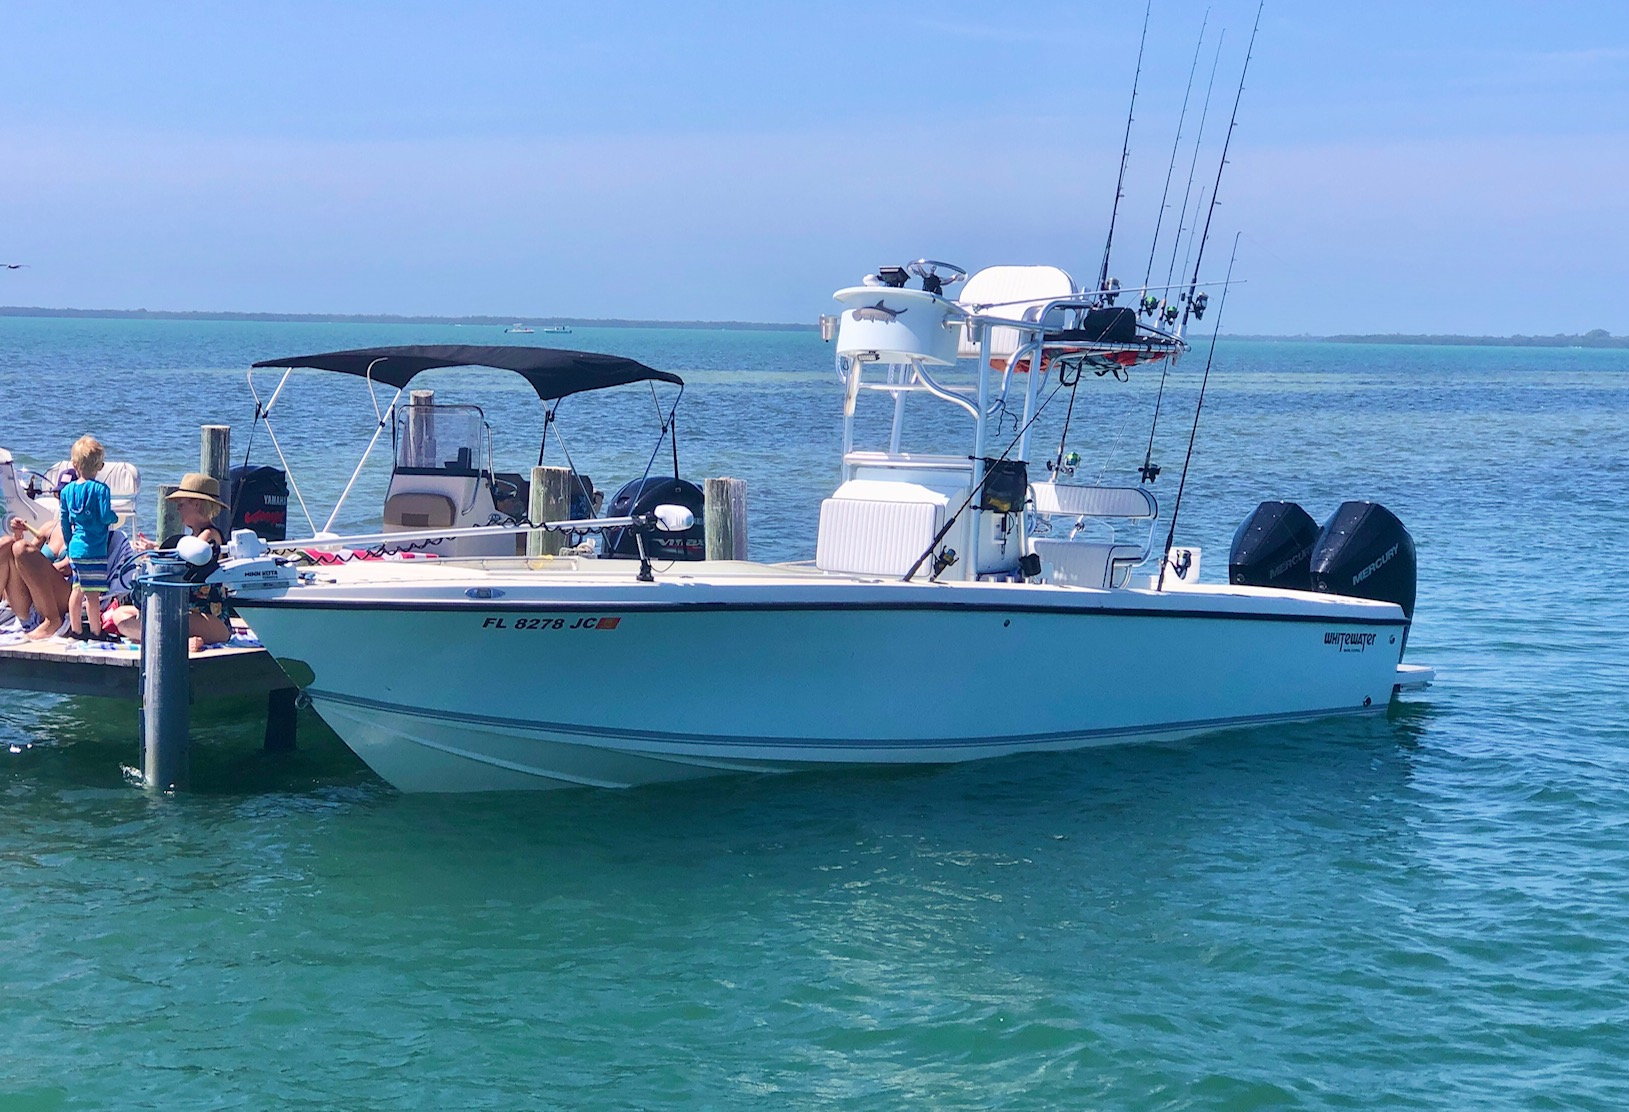 28 whitewater for sale - The Hull Truth - Boating and Fishing Forum